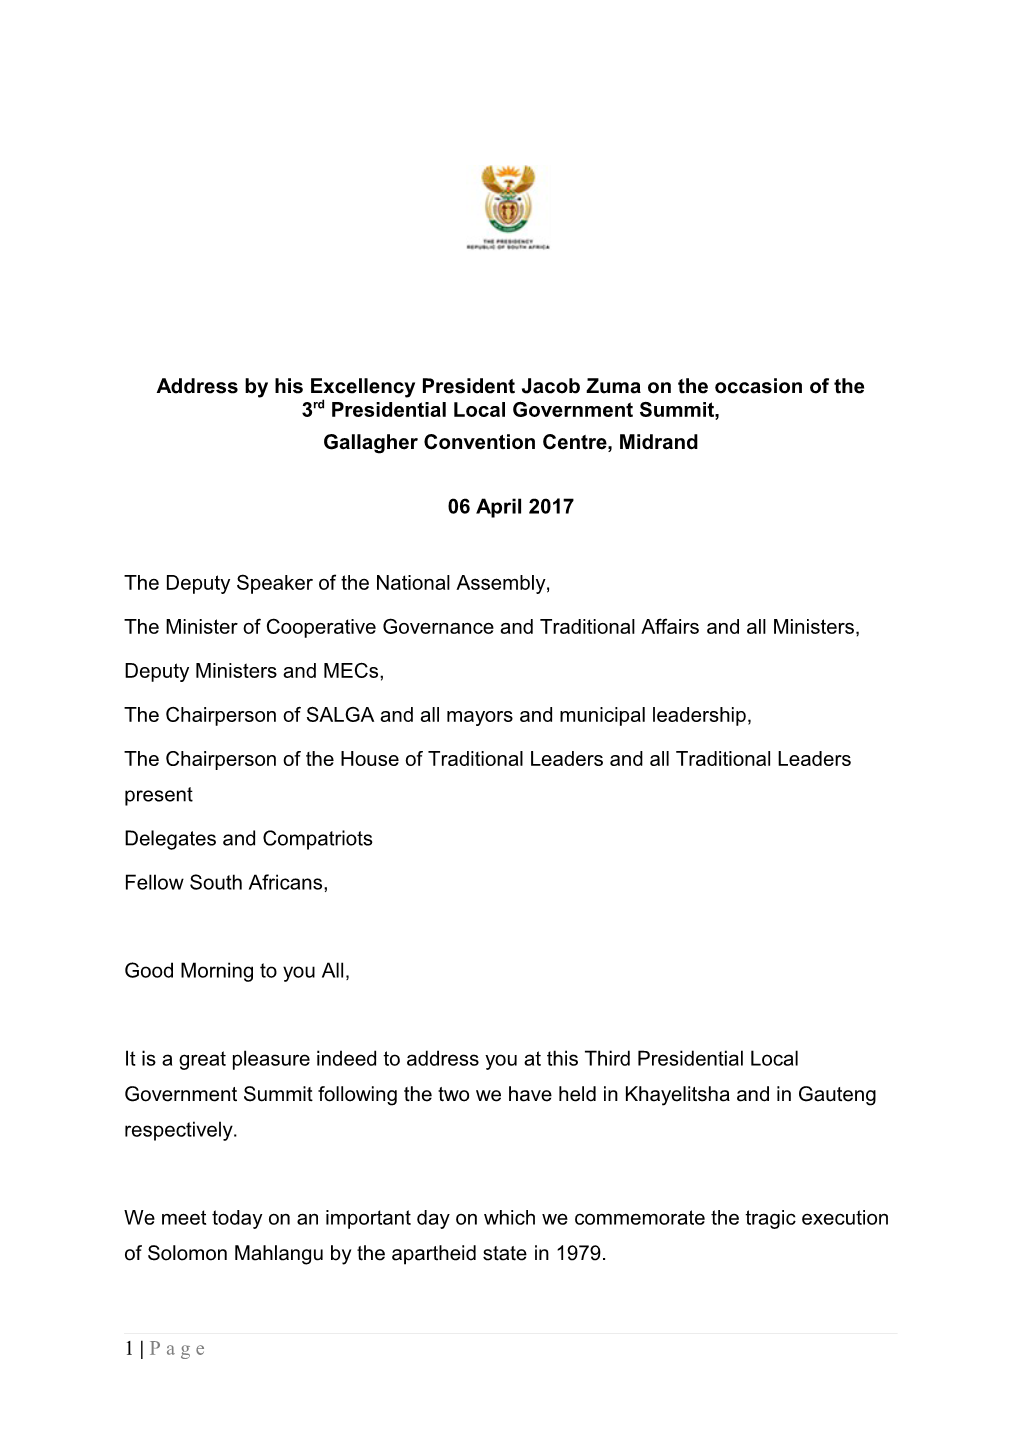 Address by His Excellency Presidentjacobzuma on the Occasion of the 3Rdpresidential Local